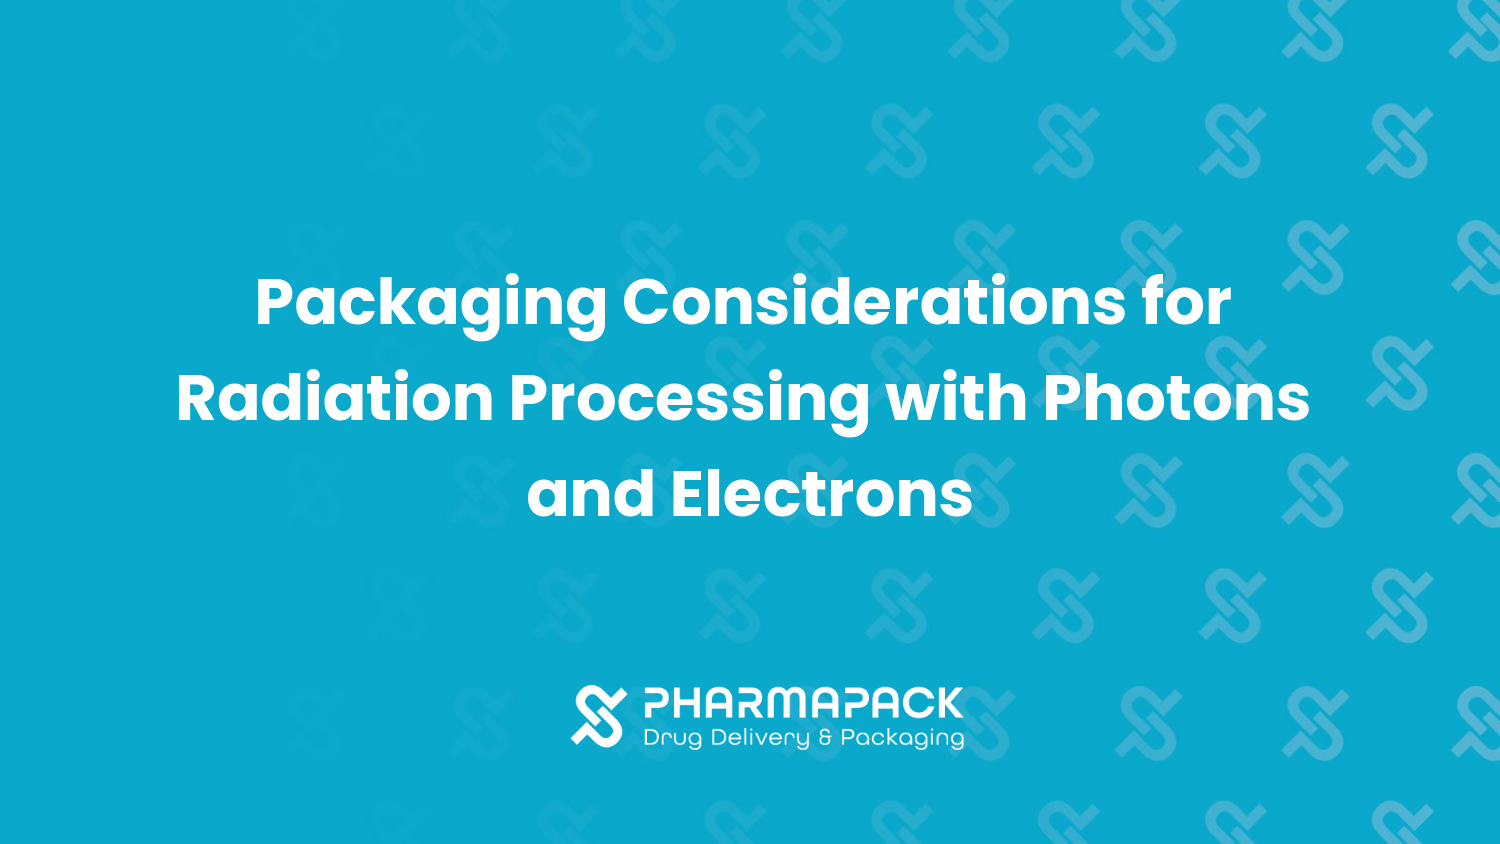 Packaging Considerations for Radiation Processing with Photons and Electrons